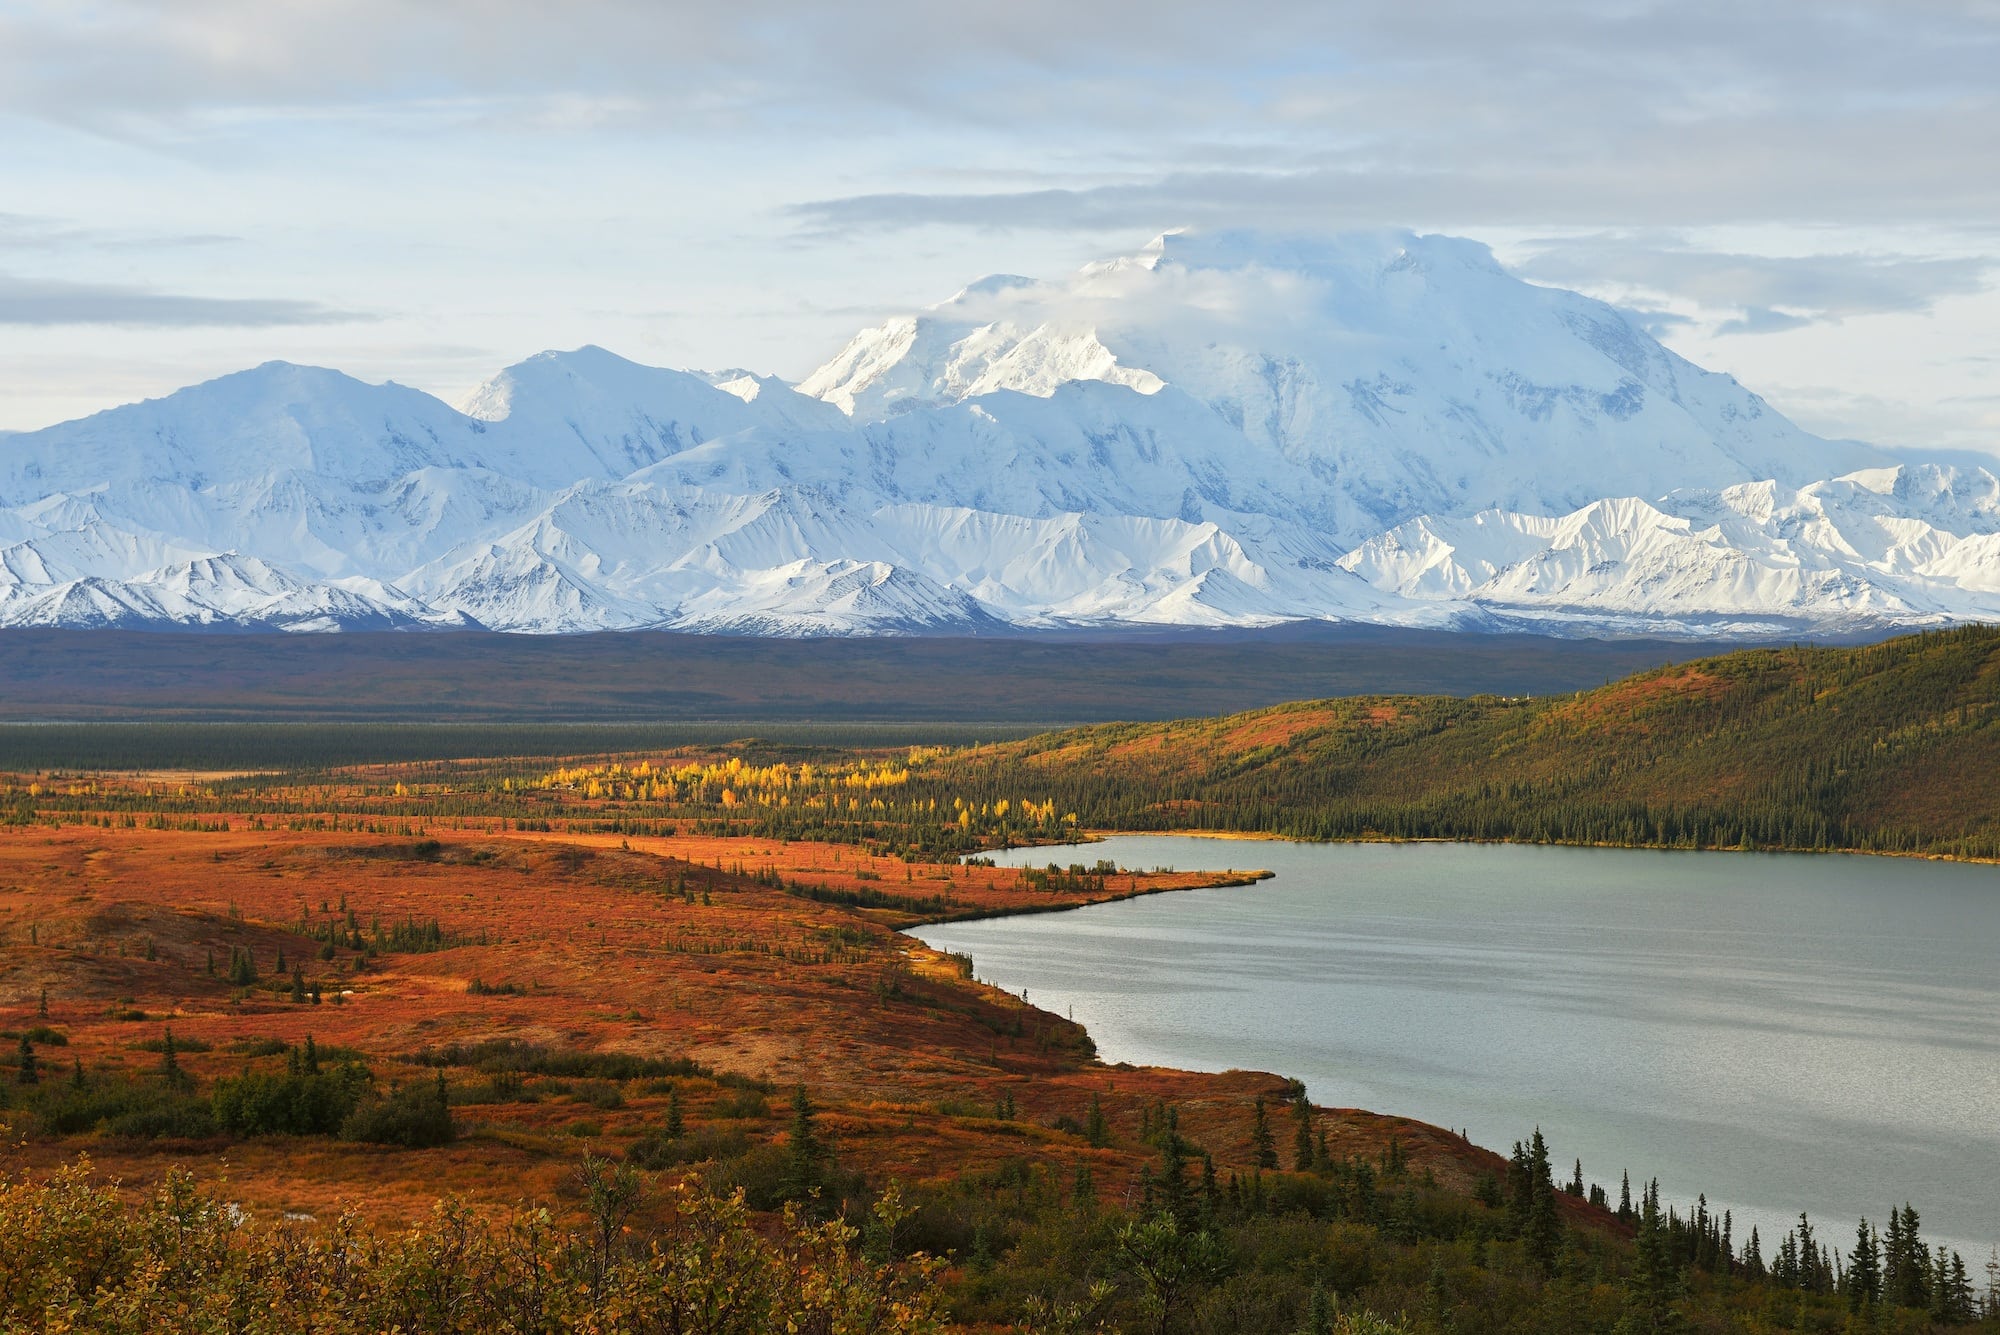 Denali National Park // Discover the best National Parks to visit in fall for the best leaf-peeping vacation. Get tips on best hikes, scenic drives, and more.